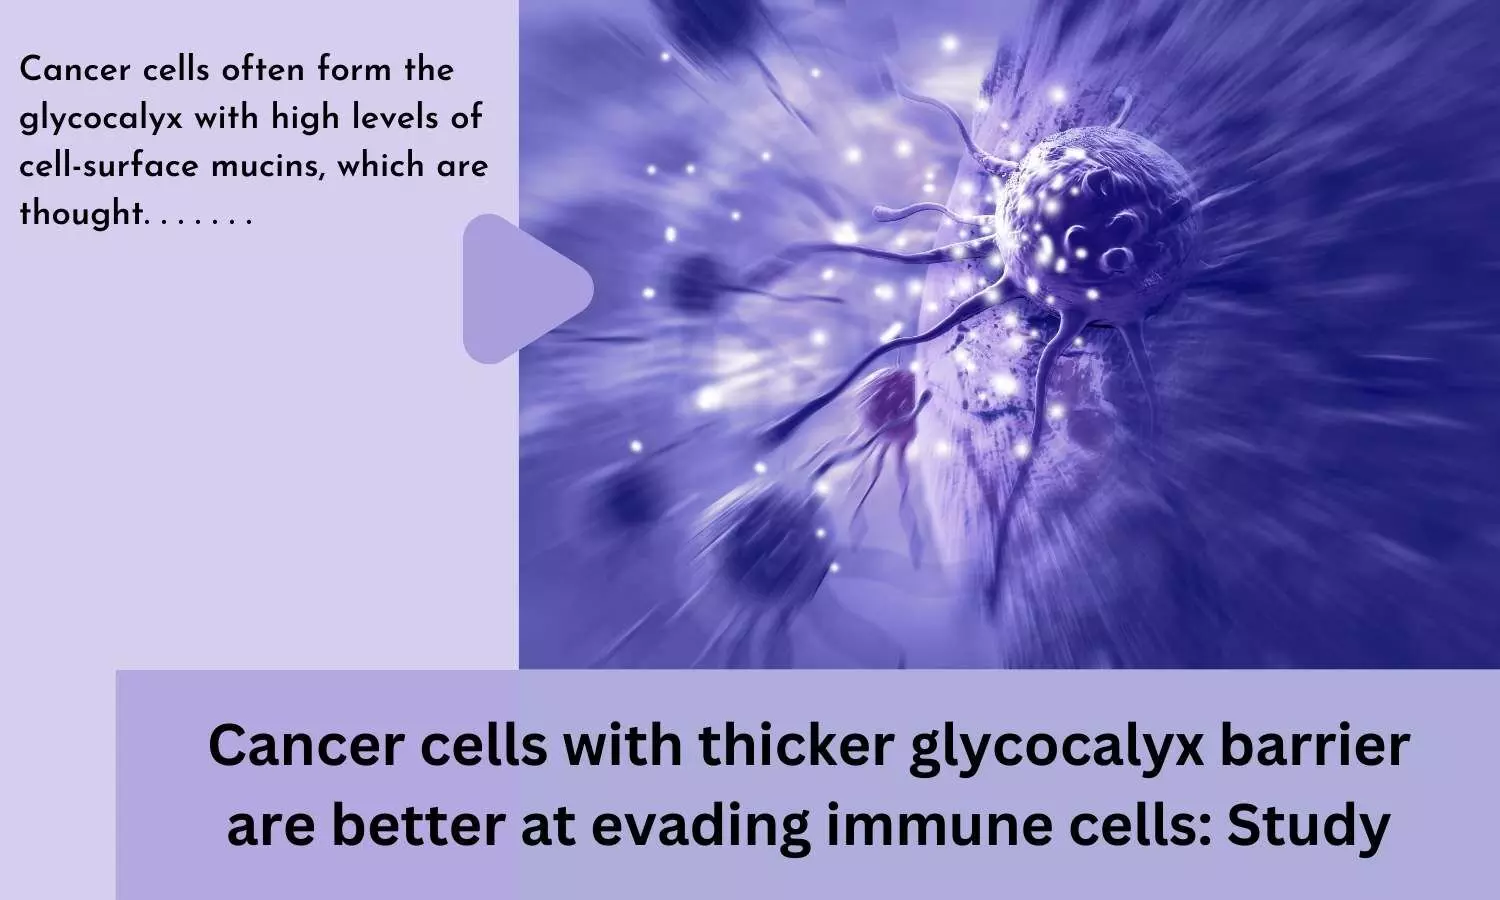 Cancer cells with thicker glycocalyx barrier are better at evading immune cells: Study